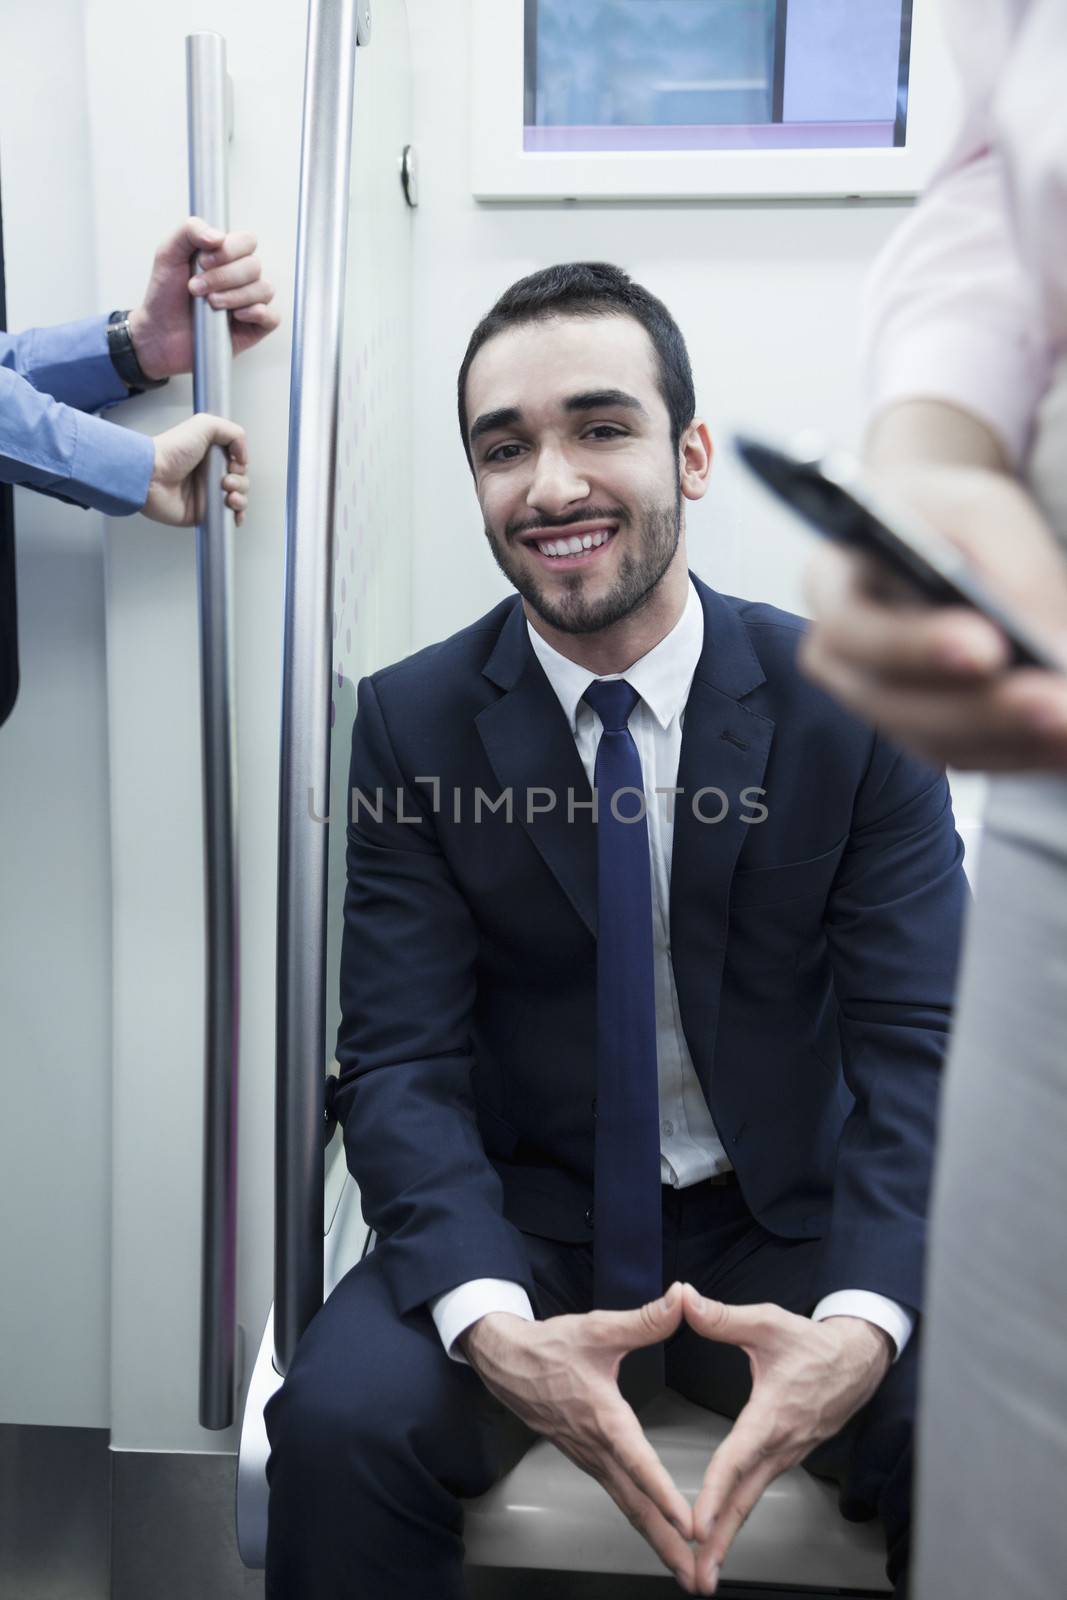 Portrait of young smiling businessman sitting on the subway and looking at camera